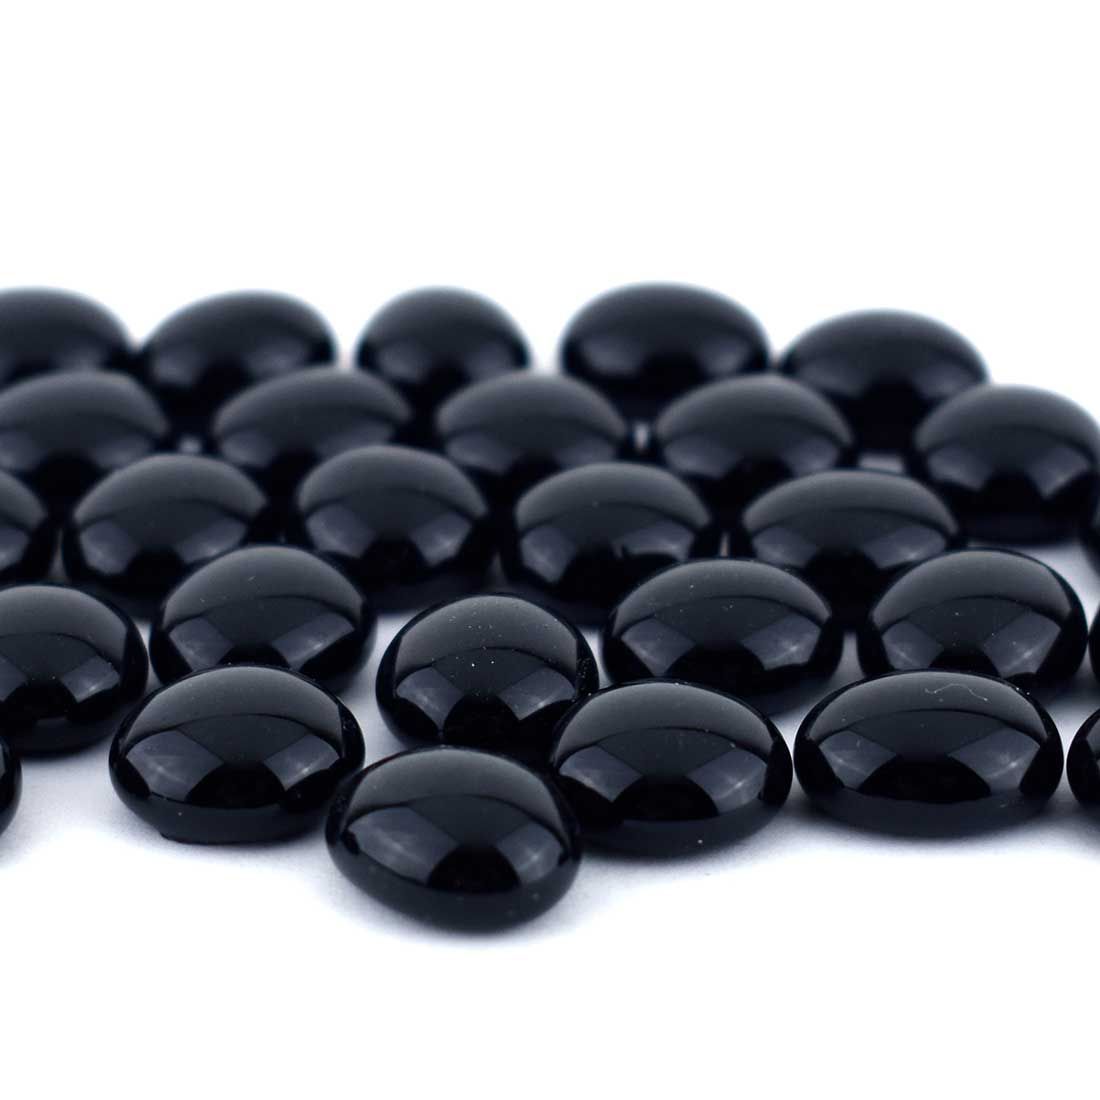 BLACK OPAL PEBBLES by OCEANSIDE COMPATIBLE & SYS 96 GLASS